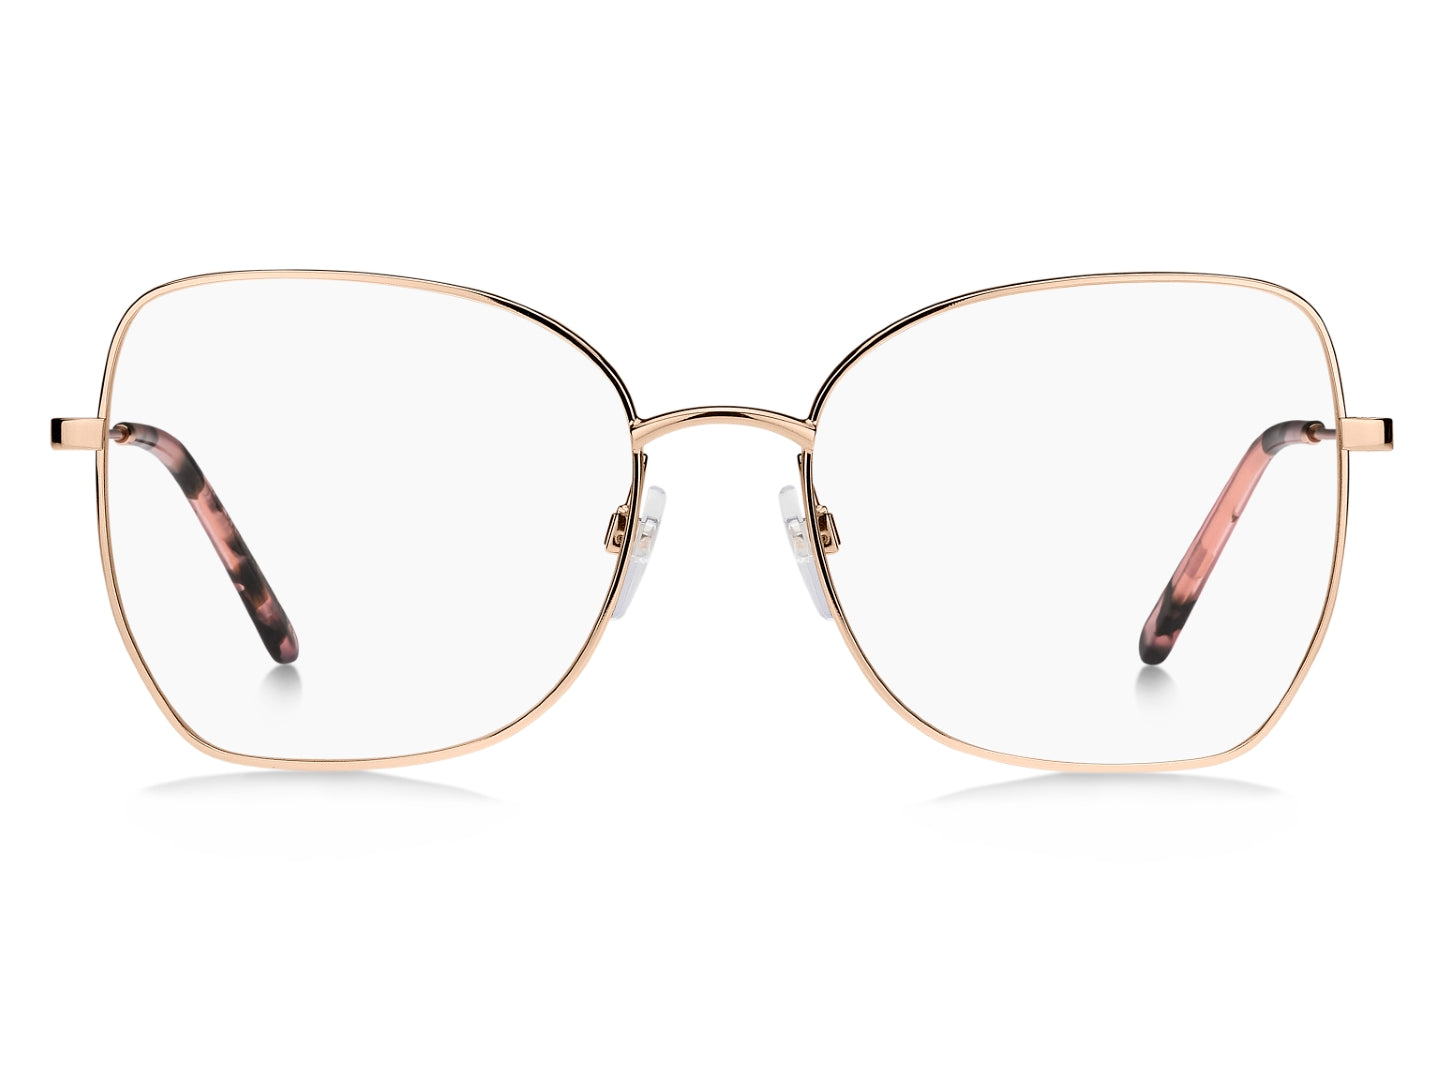 MARC JACOBS WOMAN BUTTERFLY Eyeglasses -MARC 621 Size 55